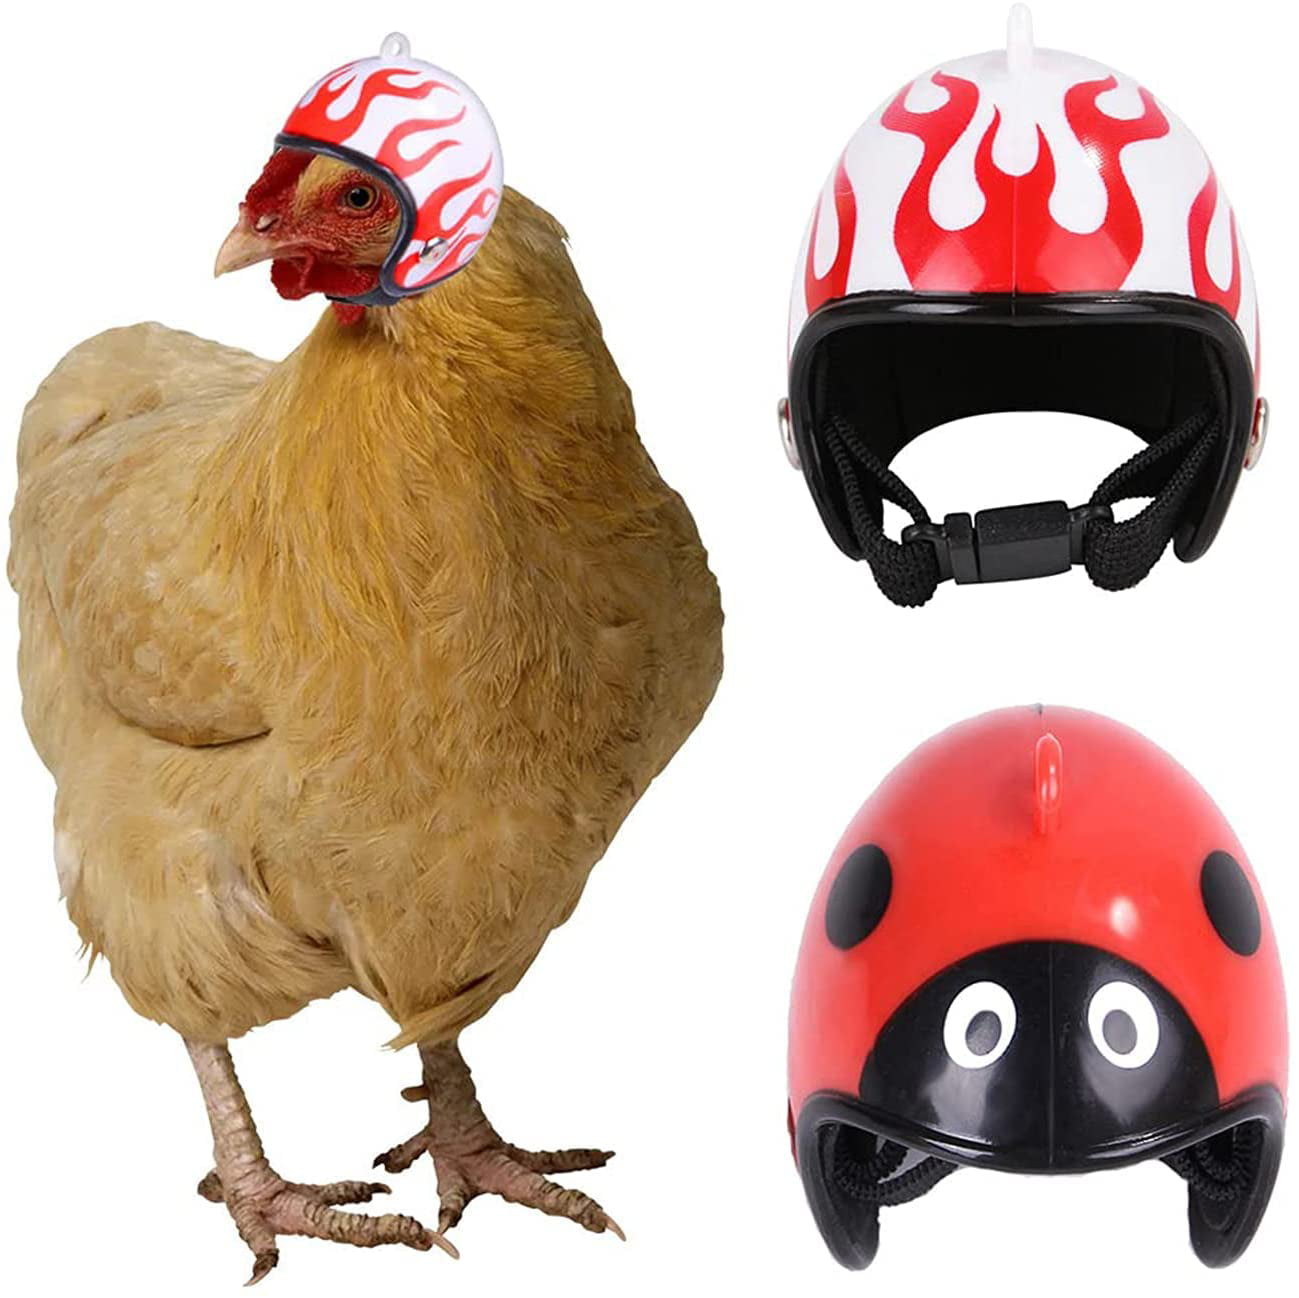 6 PCS Pet Chicken Helmet Bird Toy Helmet Hat Poultry Chicks Hat Headwear Parrot Headgear to Protect Small Poultry Head Costumes Accessories